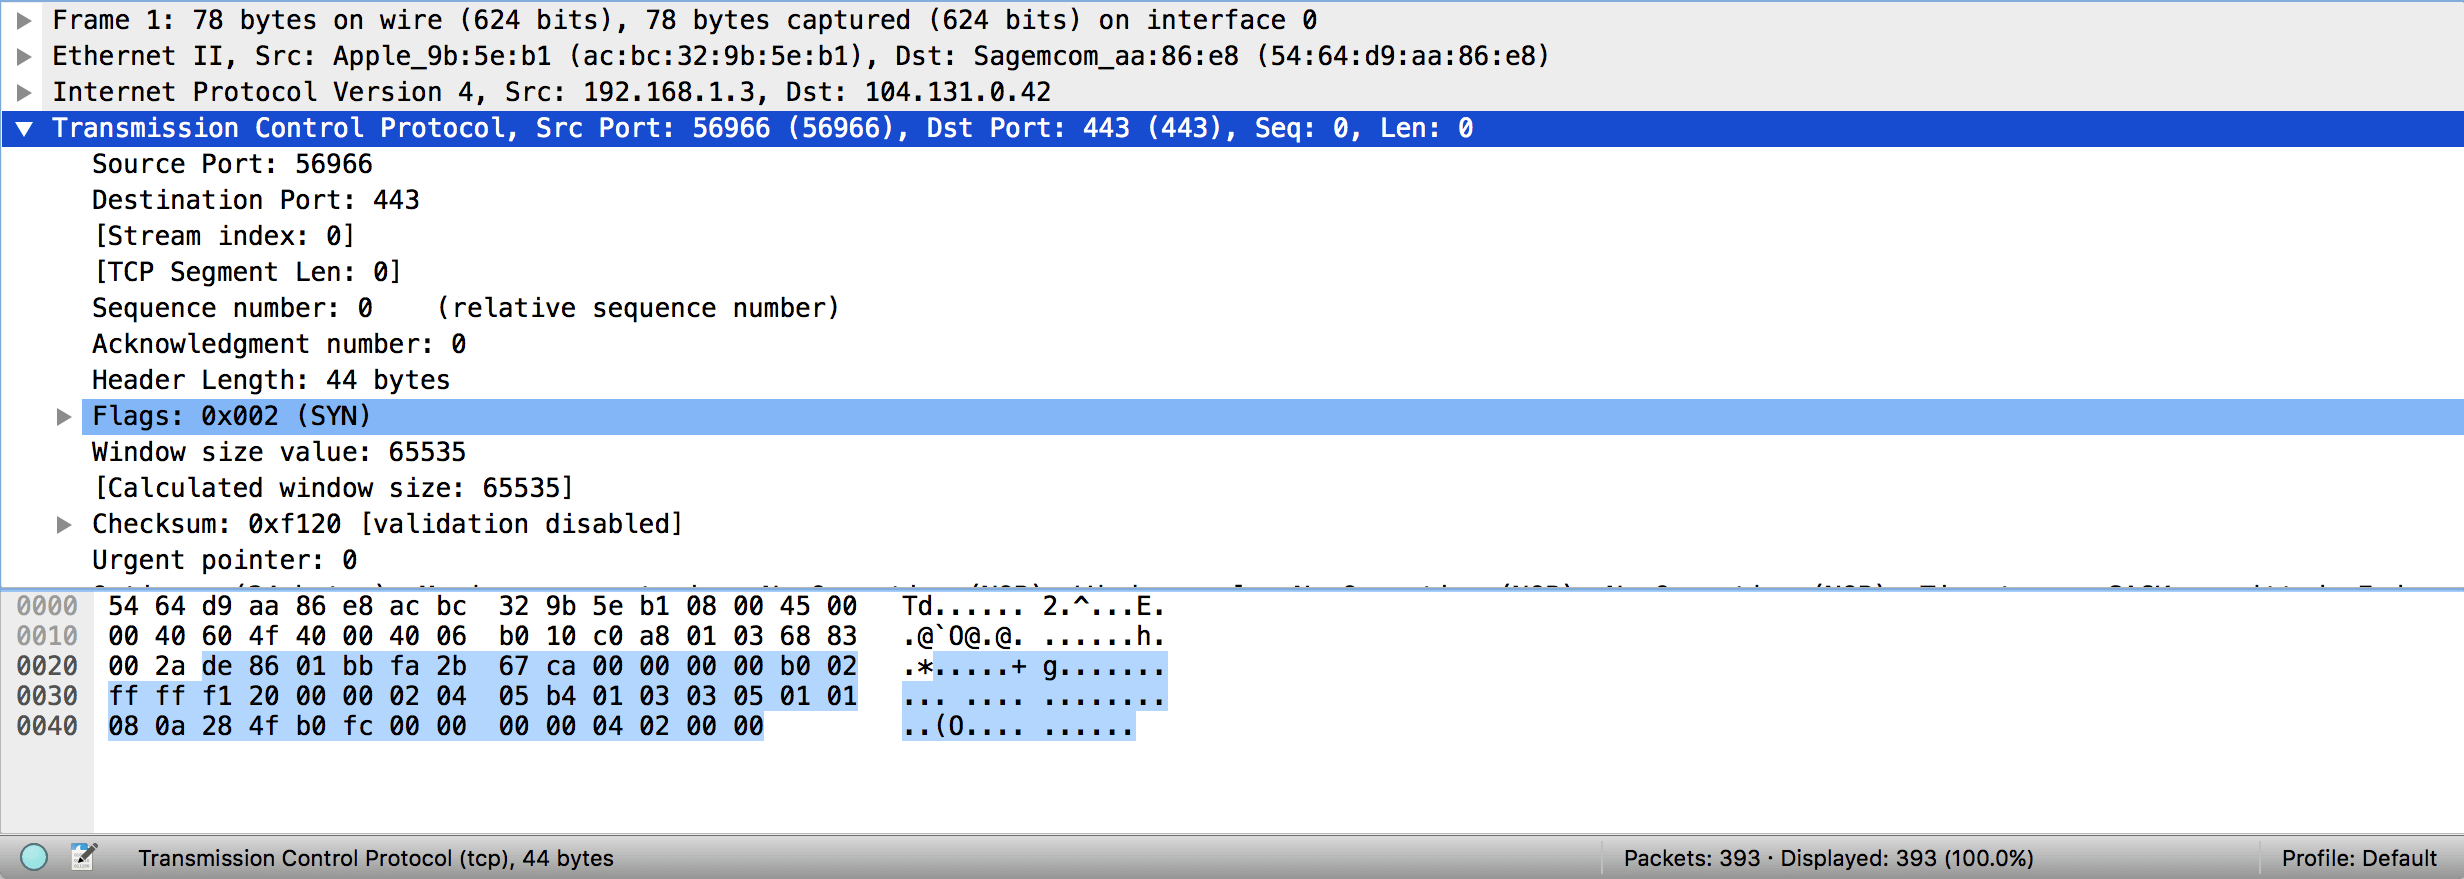 Detail view of single packet in Wireshark